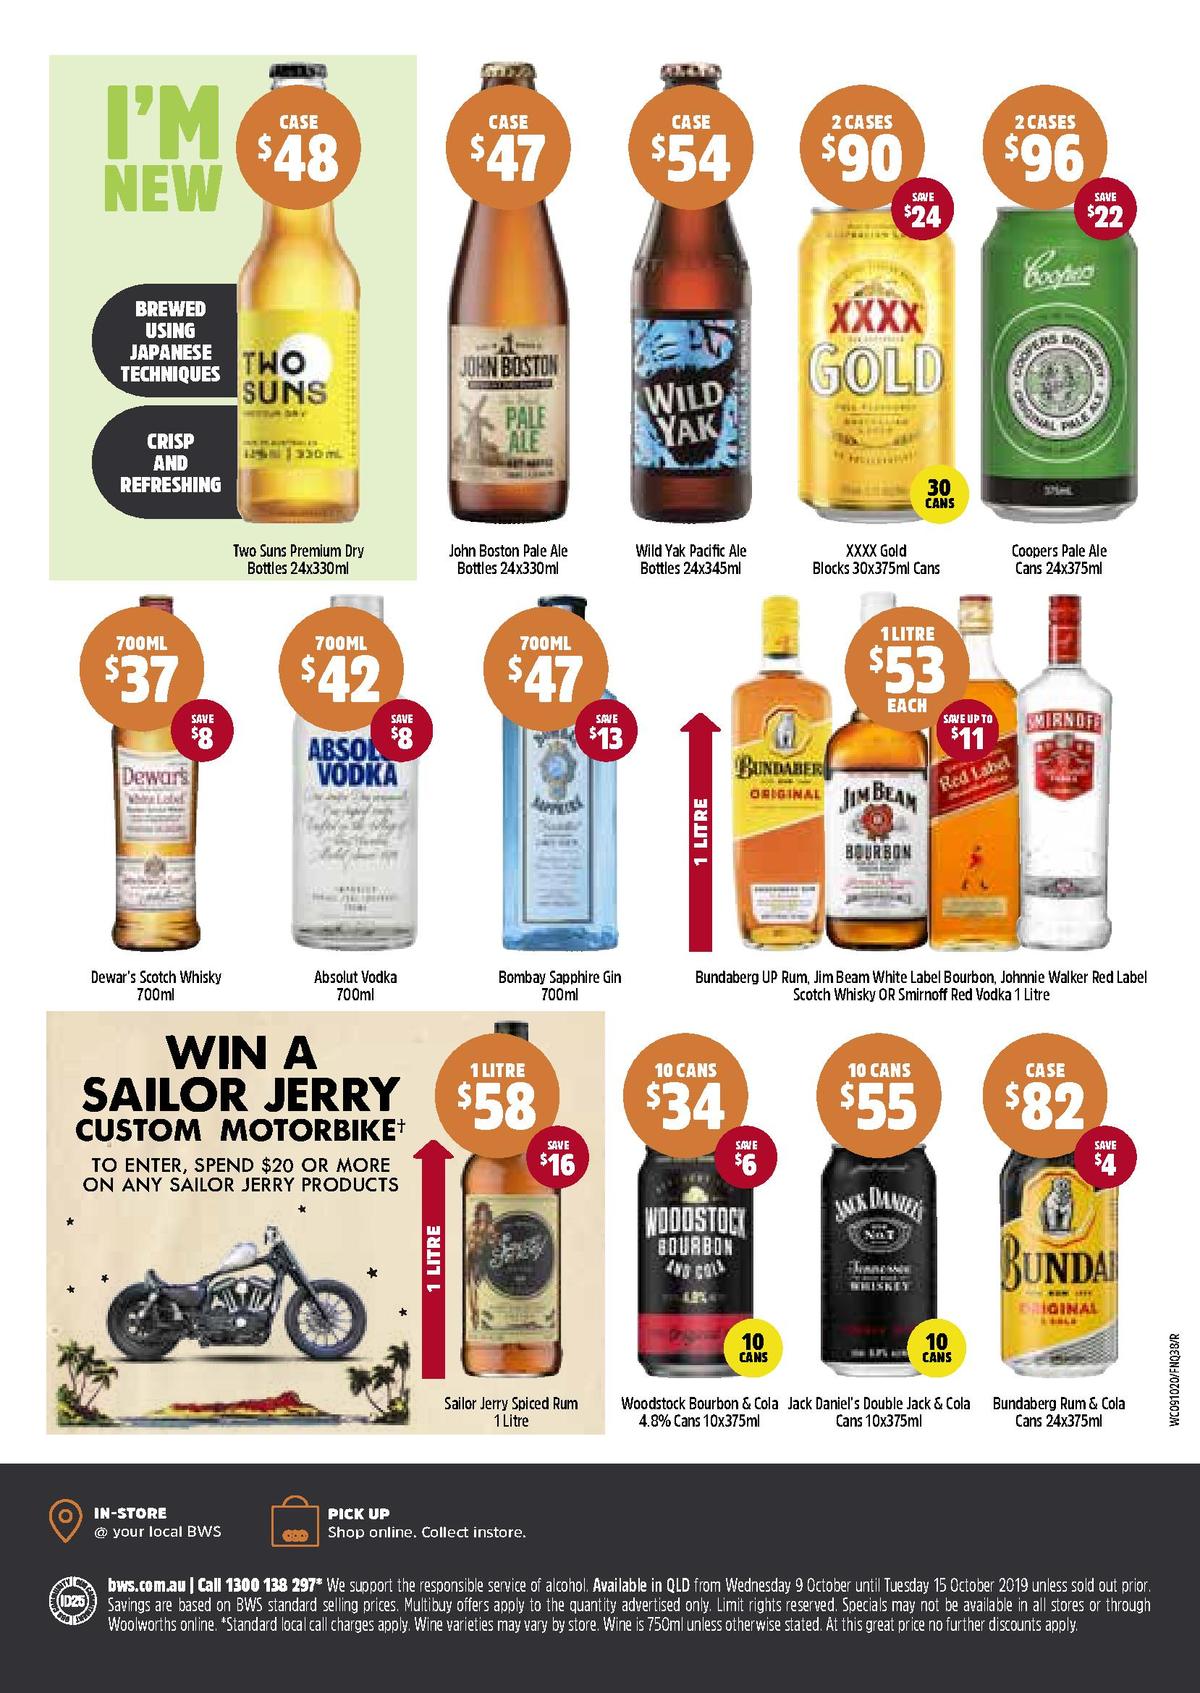 Woolworths Catalogues from 9 October